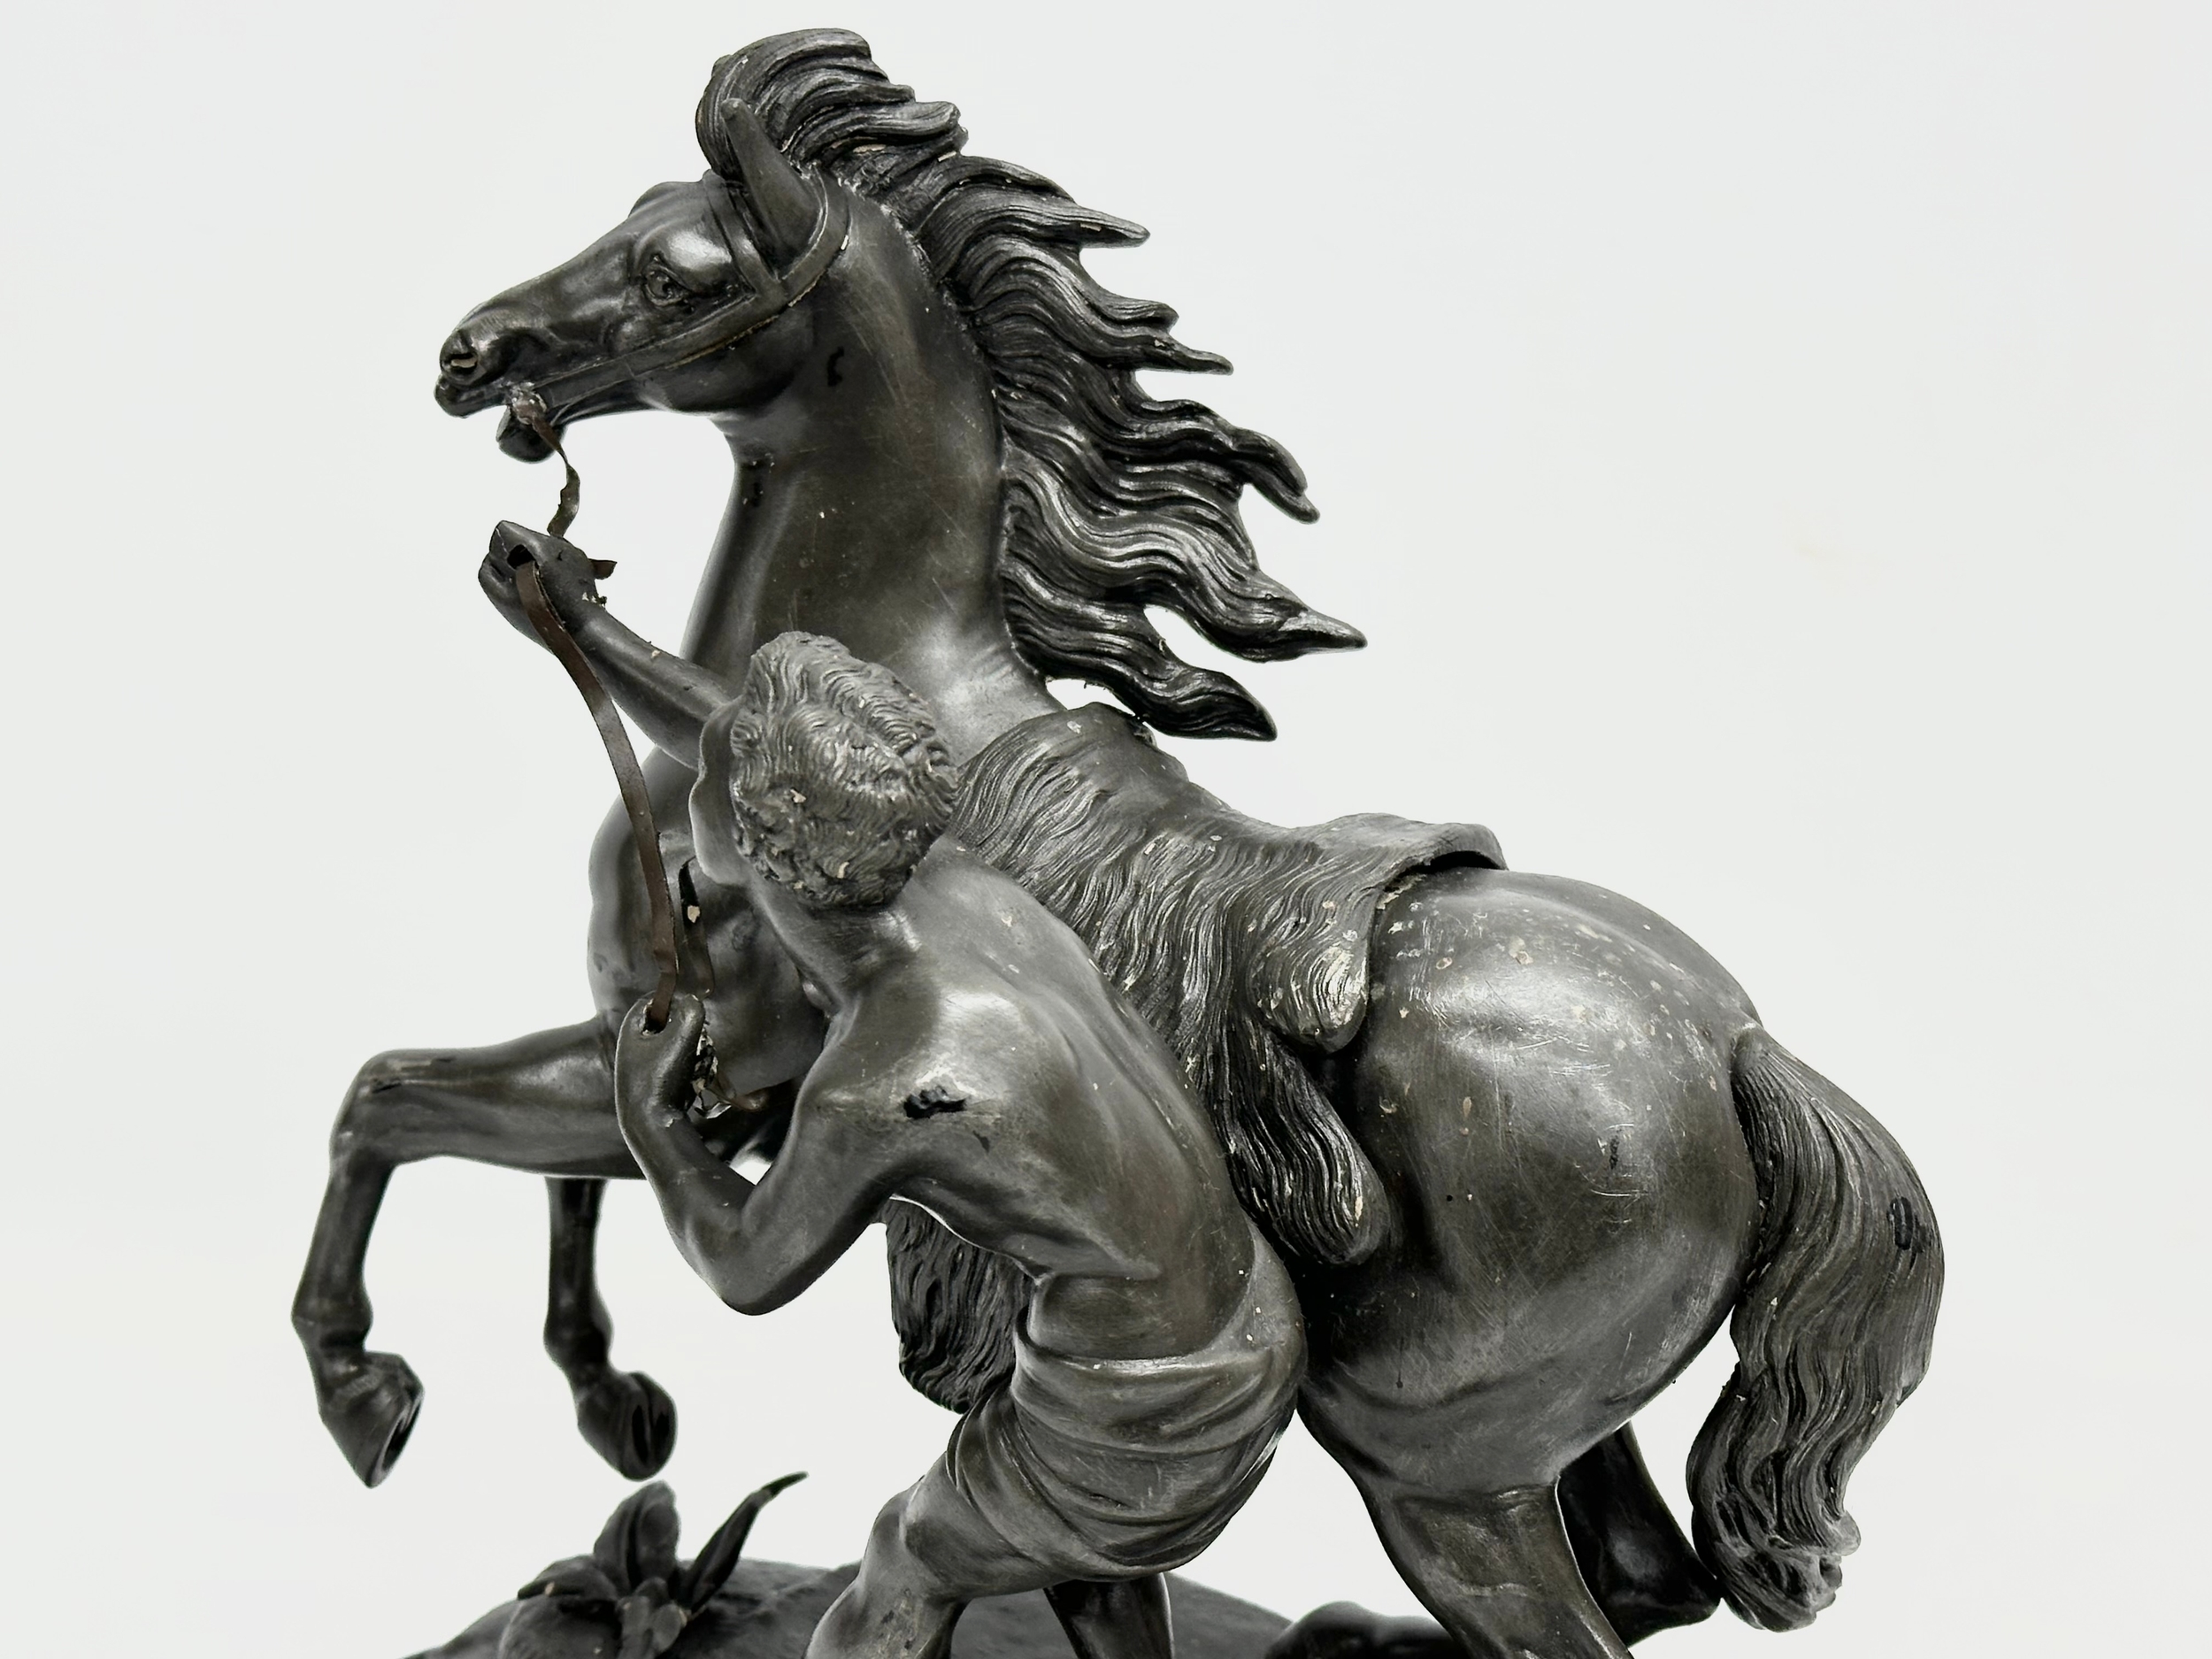 A Late 19th Century Spelter Marley Horse figure. Circa 1880-1900. 27x14x31cm - Image 4 of 5